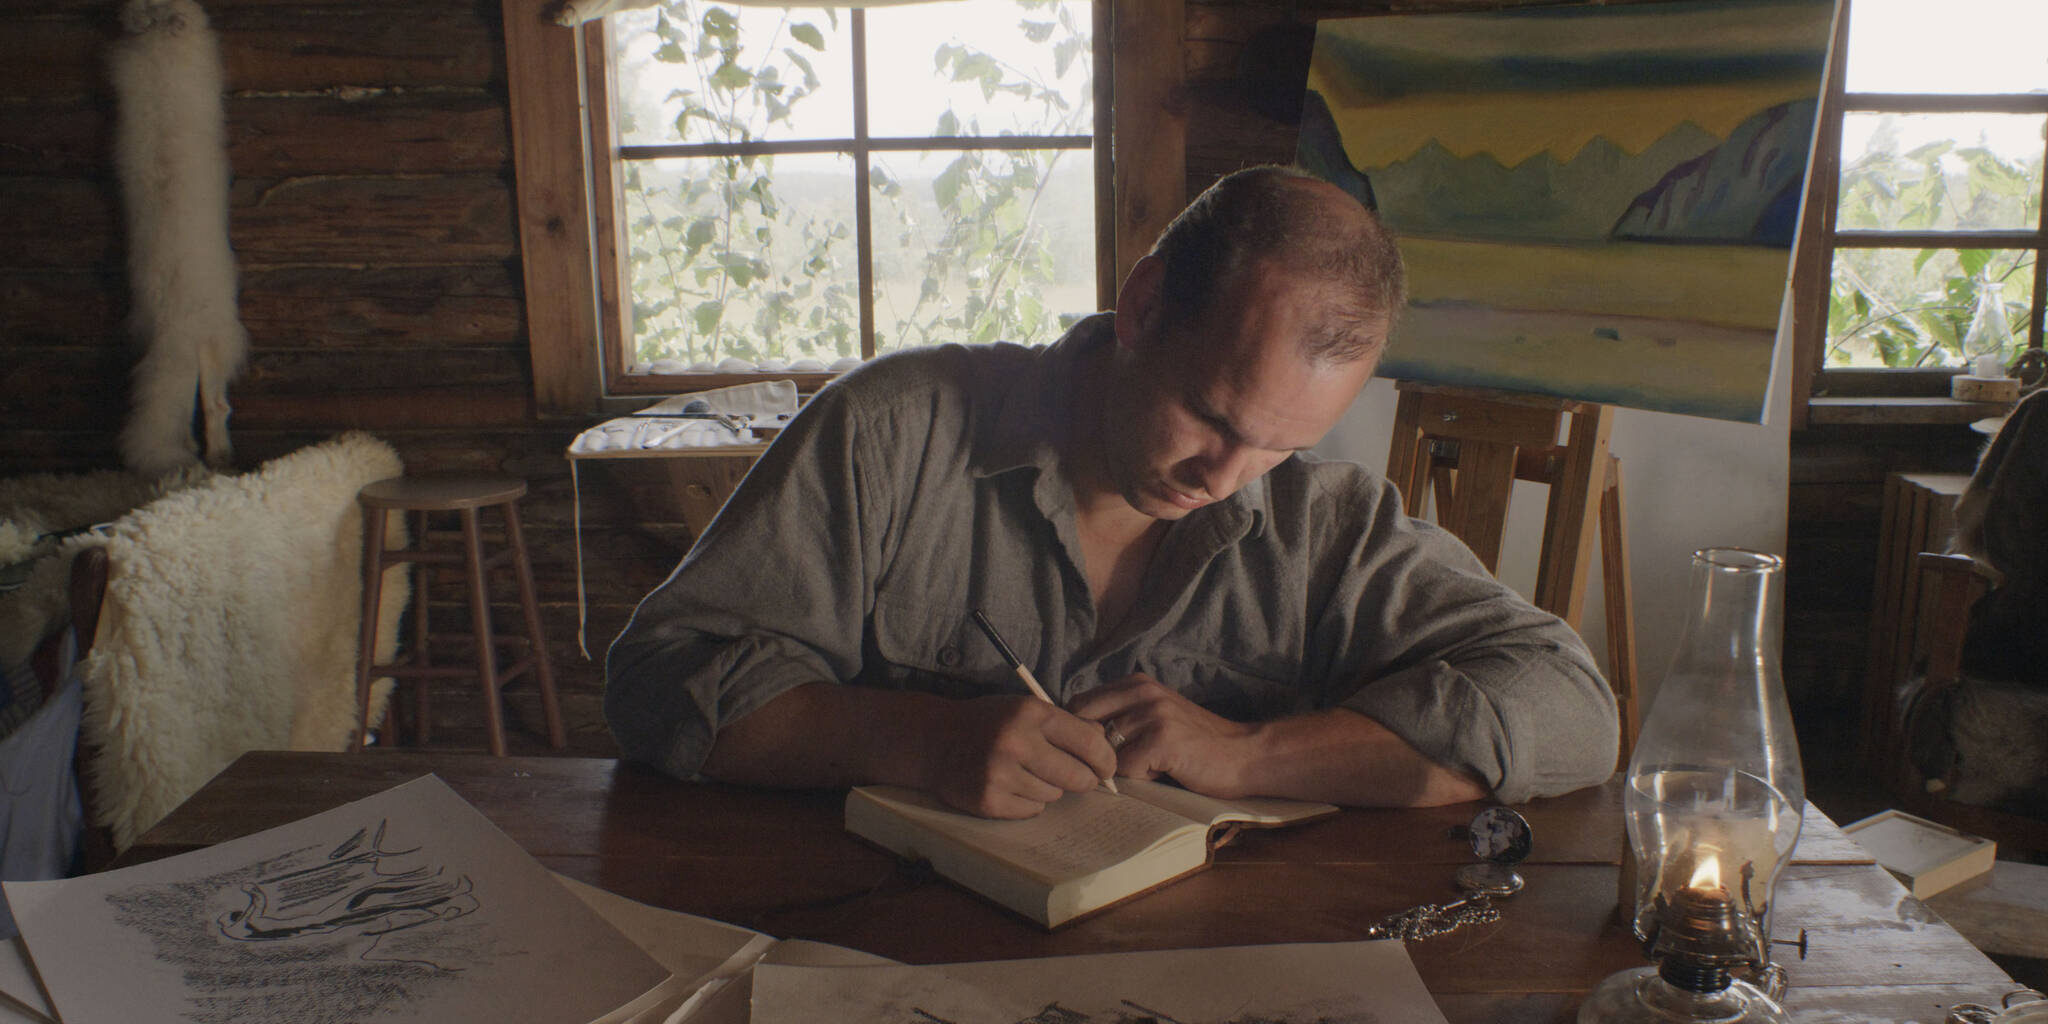 Bradford James Jackson portrays Rockwell Kent in “A Dreamer’s Search.” (Photo courtesy Eric Downs/Downstream Films)